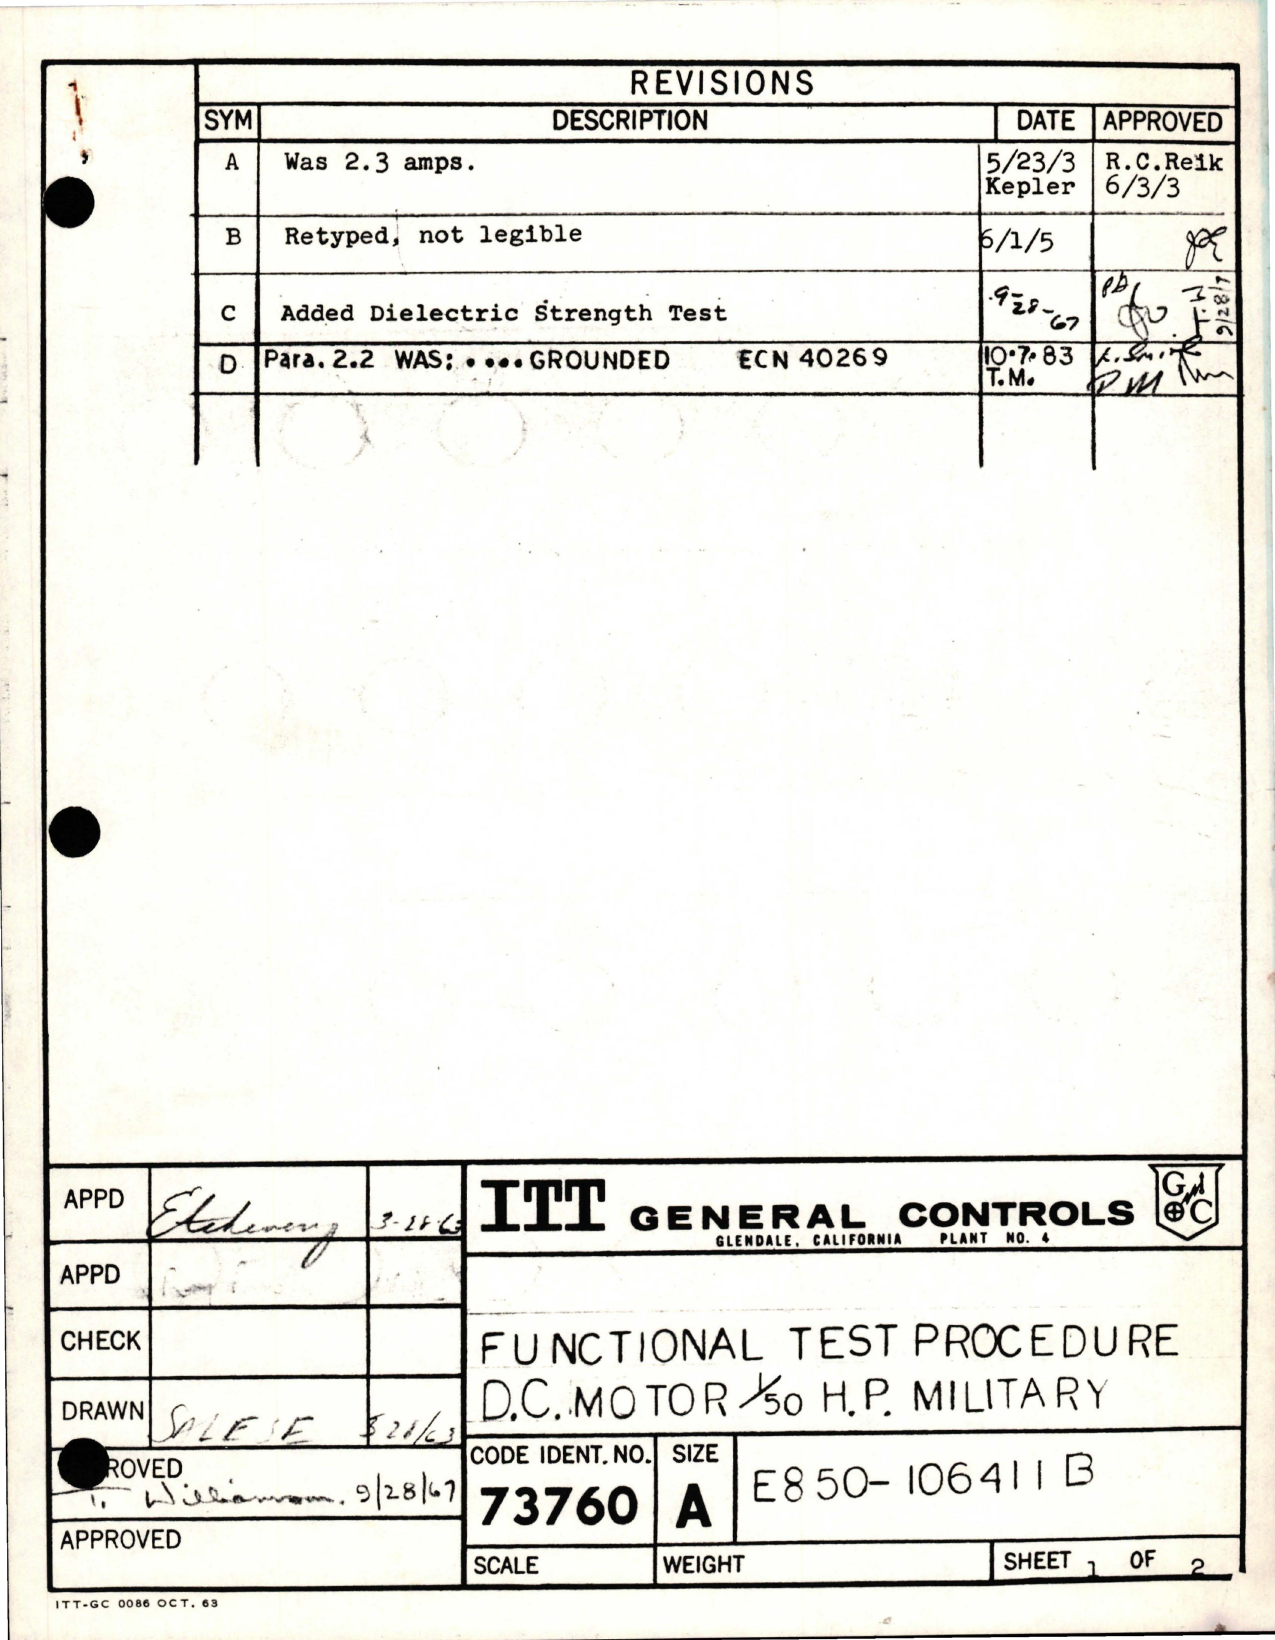 Sample page 1 from AirCorps Library document: Functional Test Procedure for DC Motor 1/50 HP